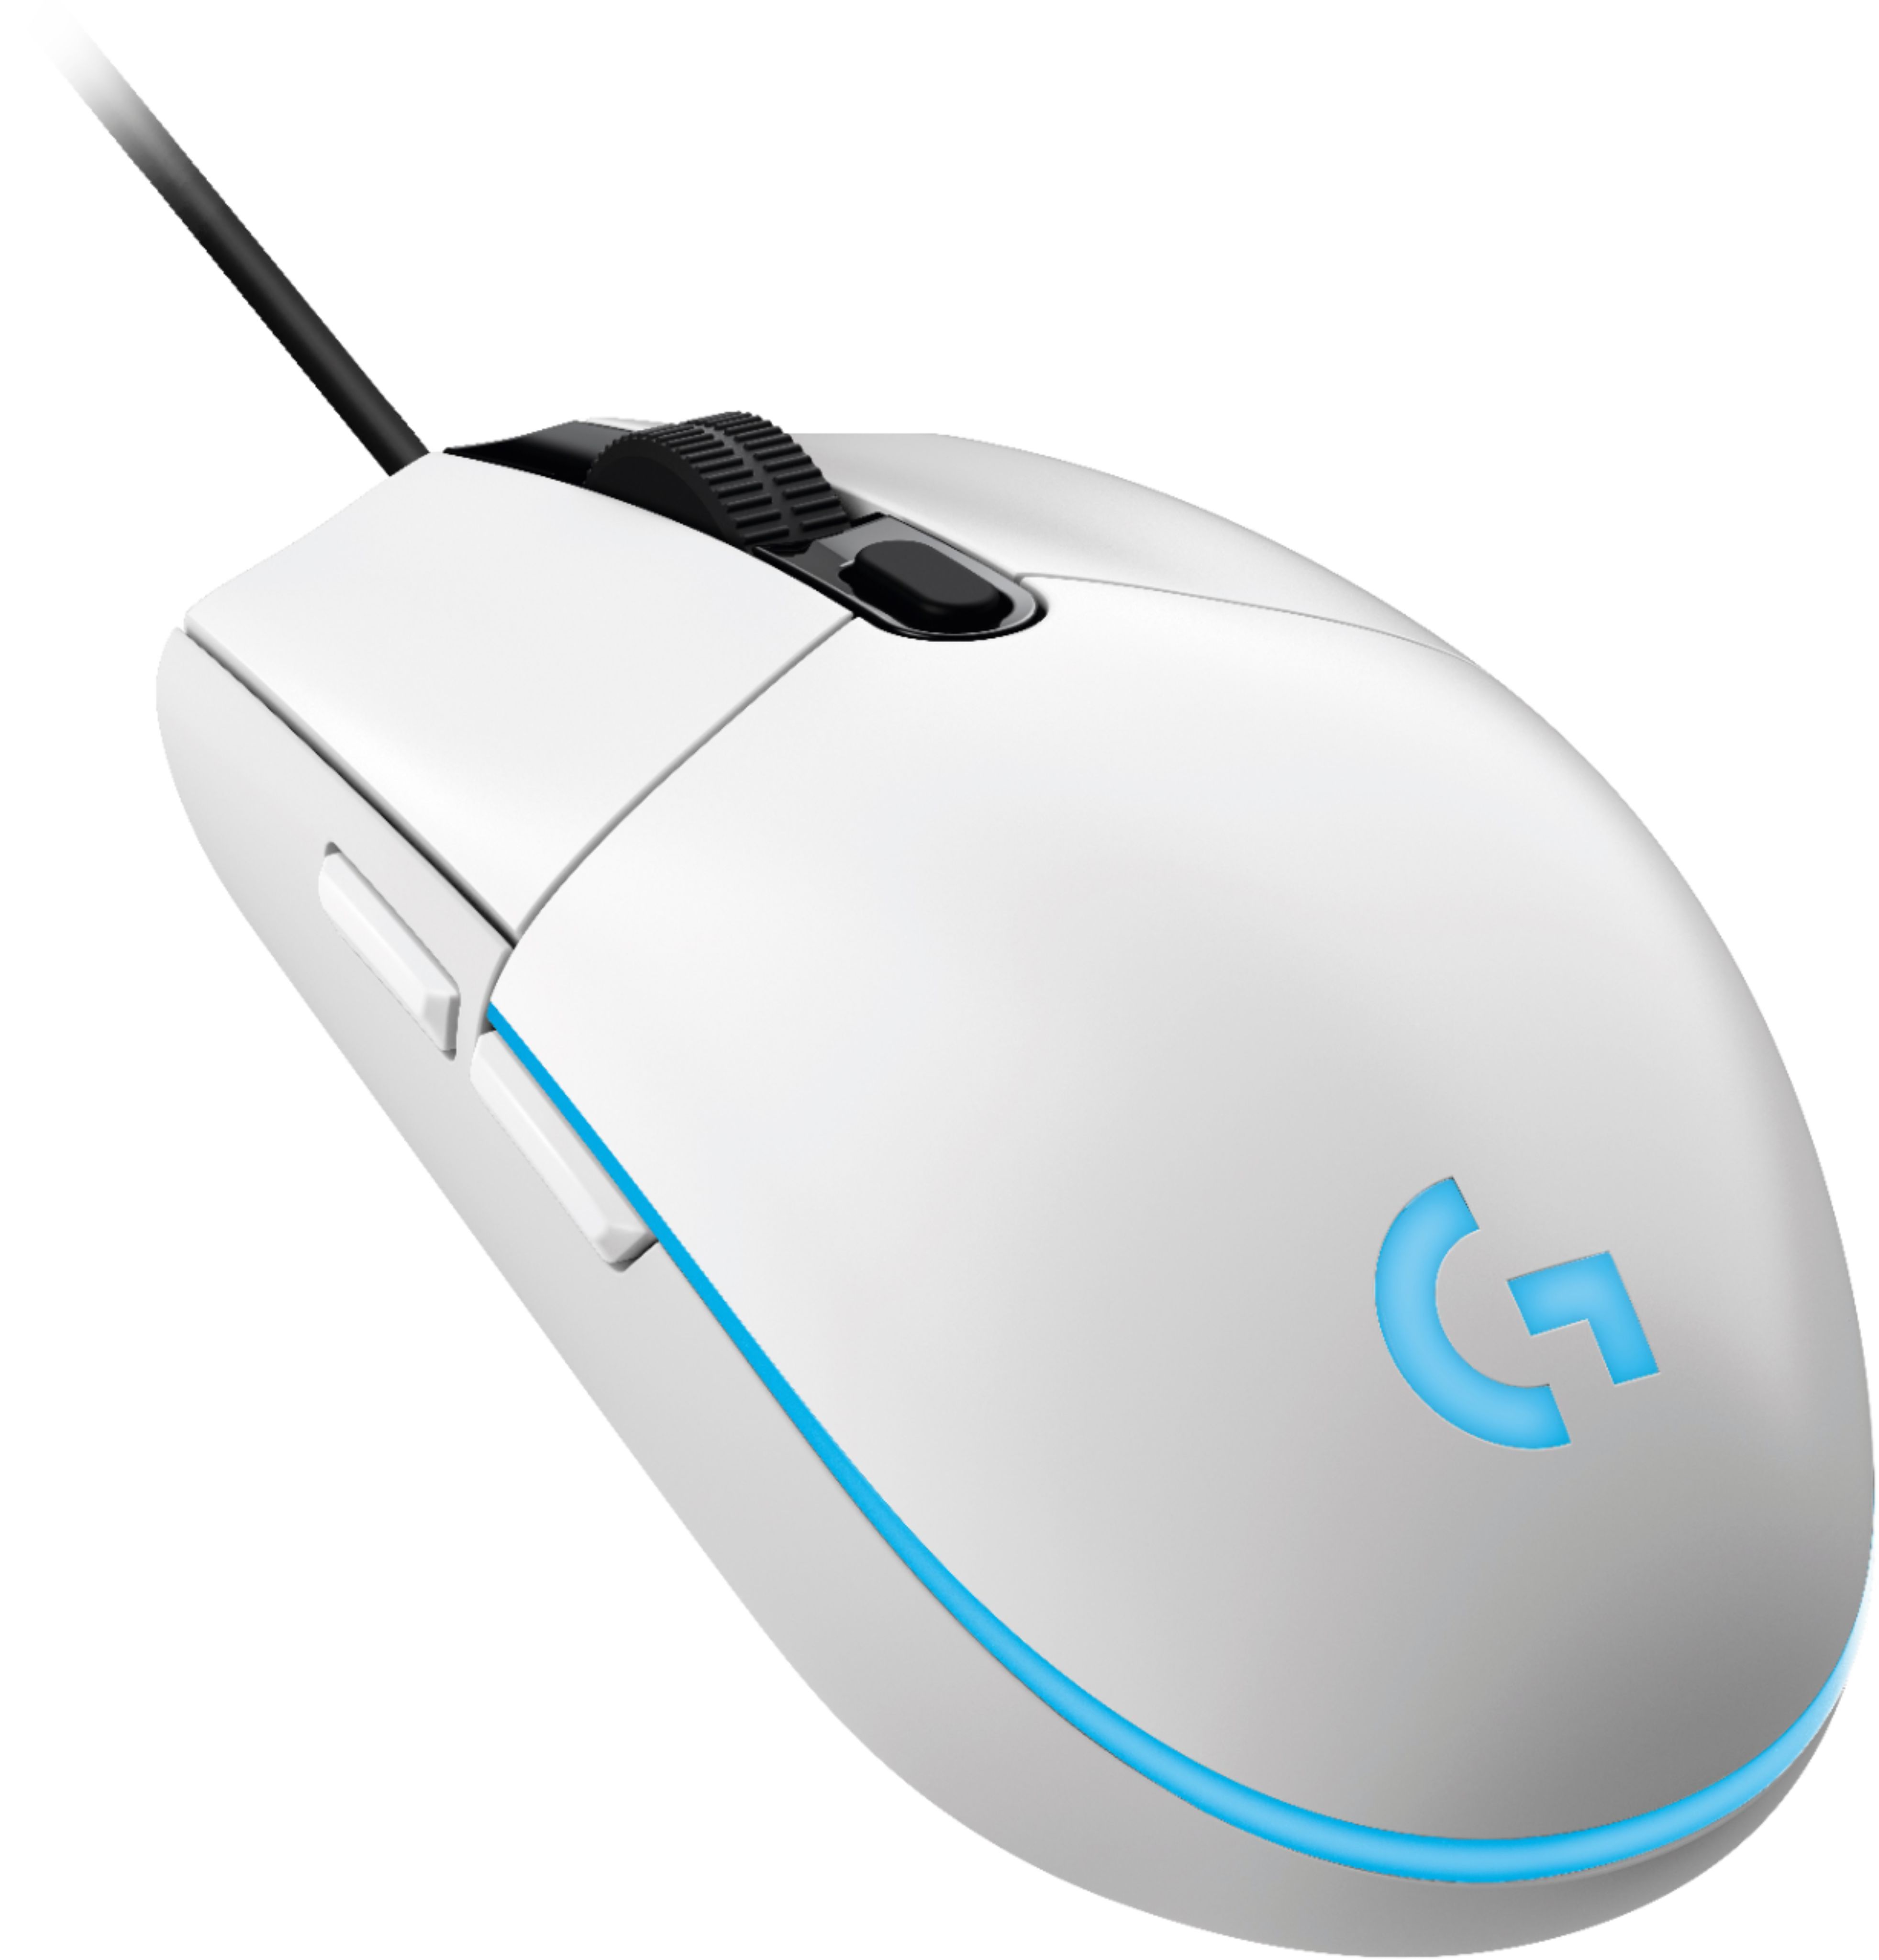 Logitech G203 LIGHTSYNC Wired Optical Gaming Mouse with 8,000 DPI sensor  Black 910-005790 - Best Buy